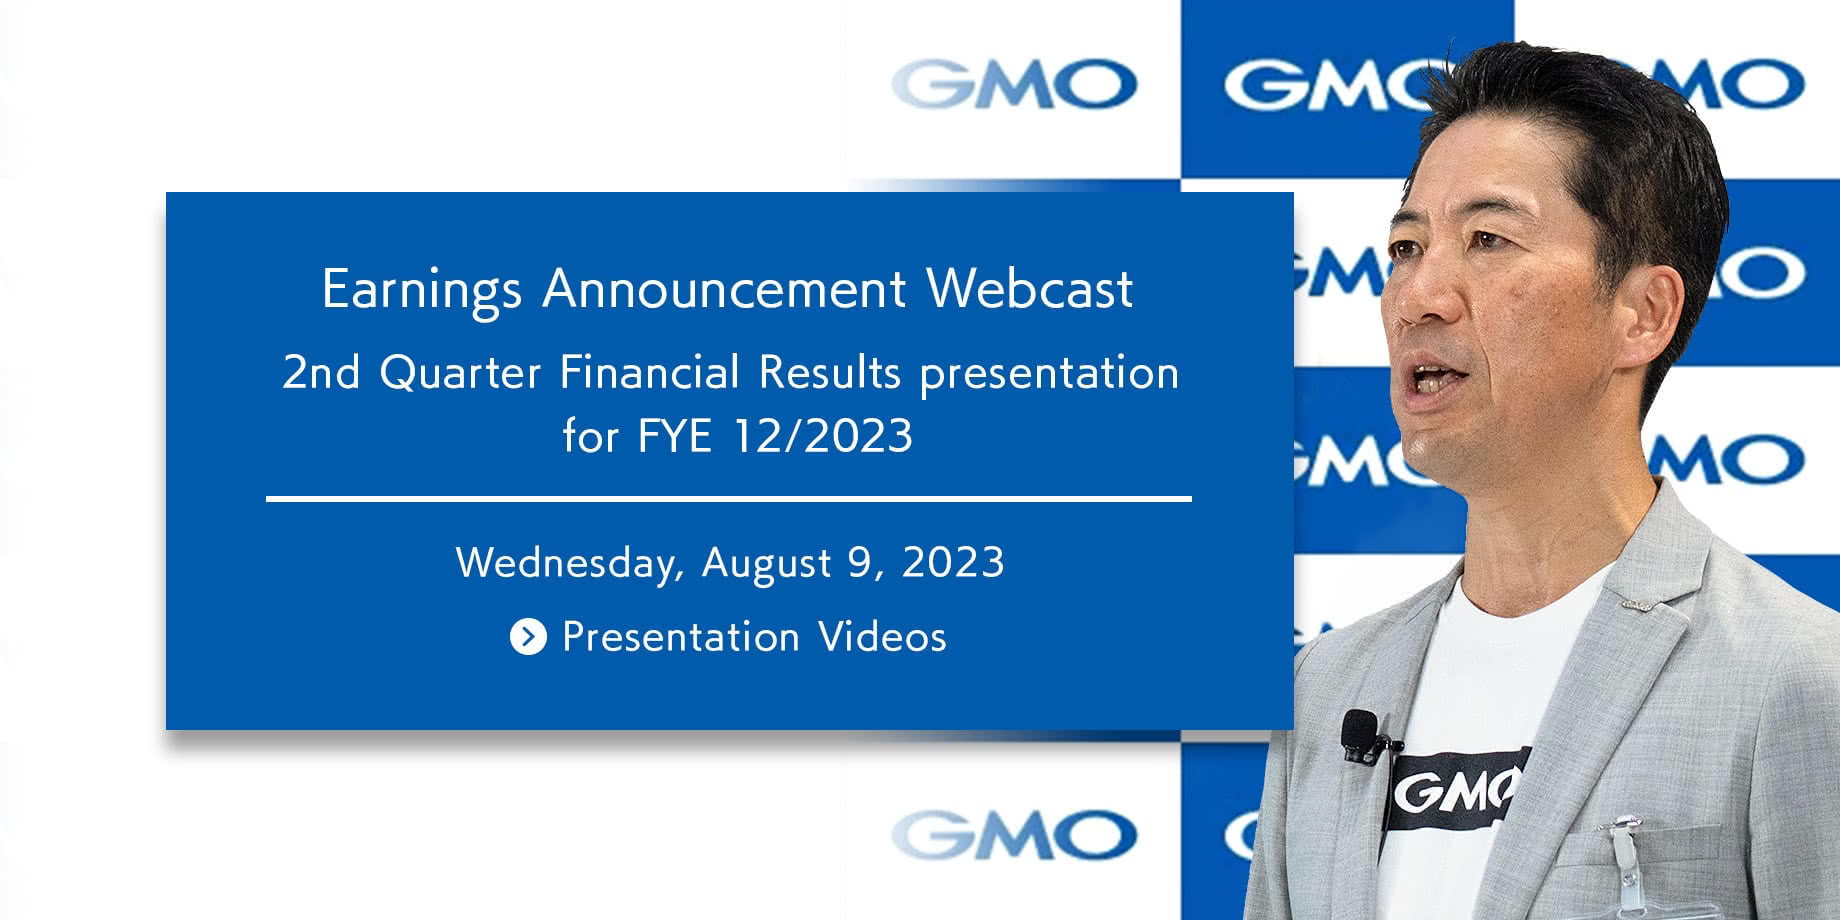 2nd Quarter, Fiscal Year 2023 Earnings Announcement Webcast - Wednesday, August 9, 2023